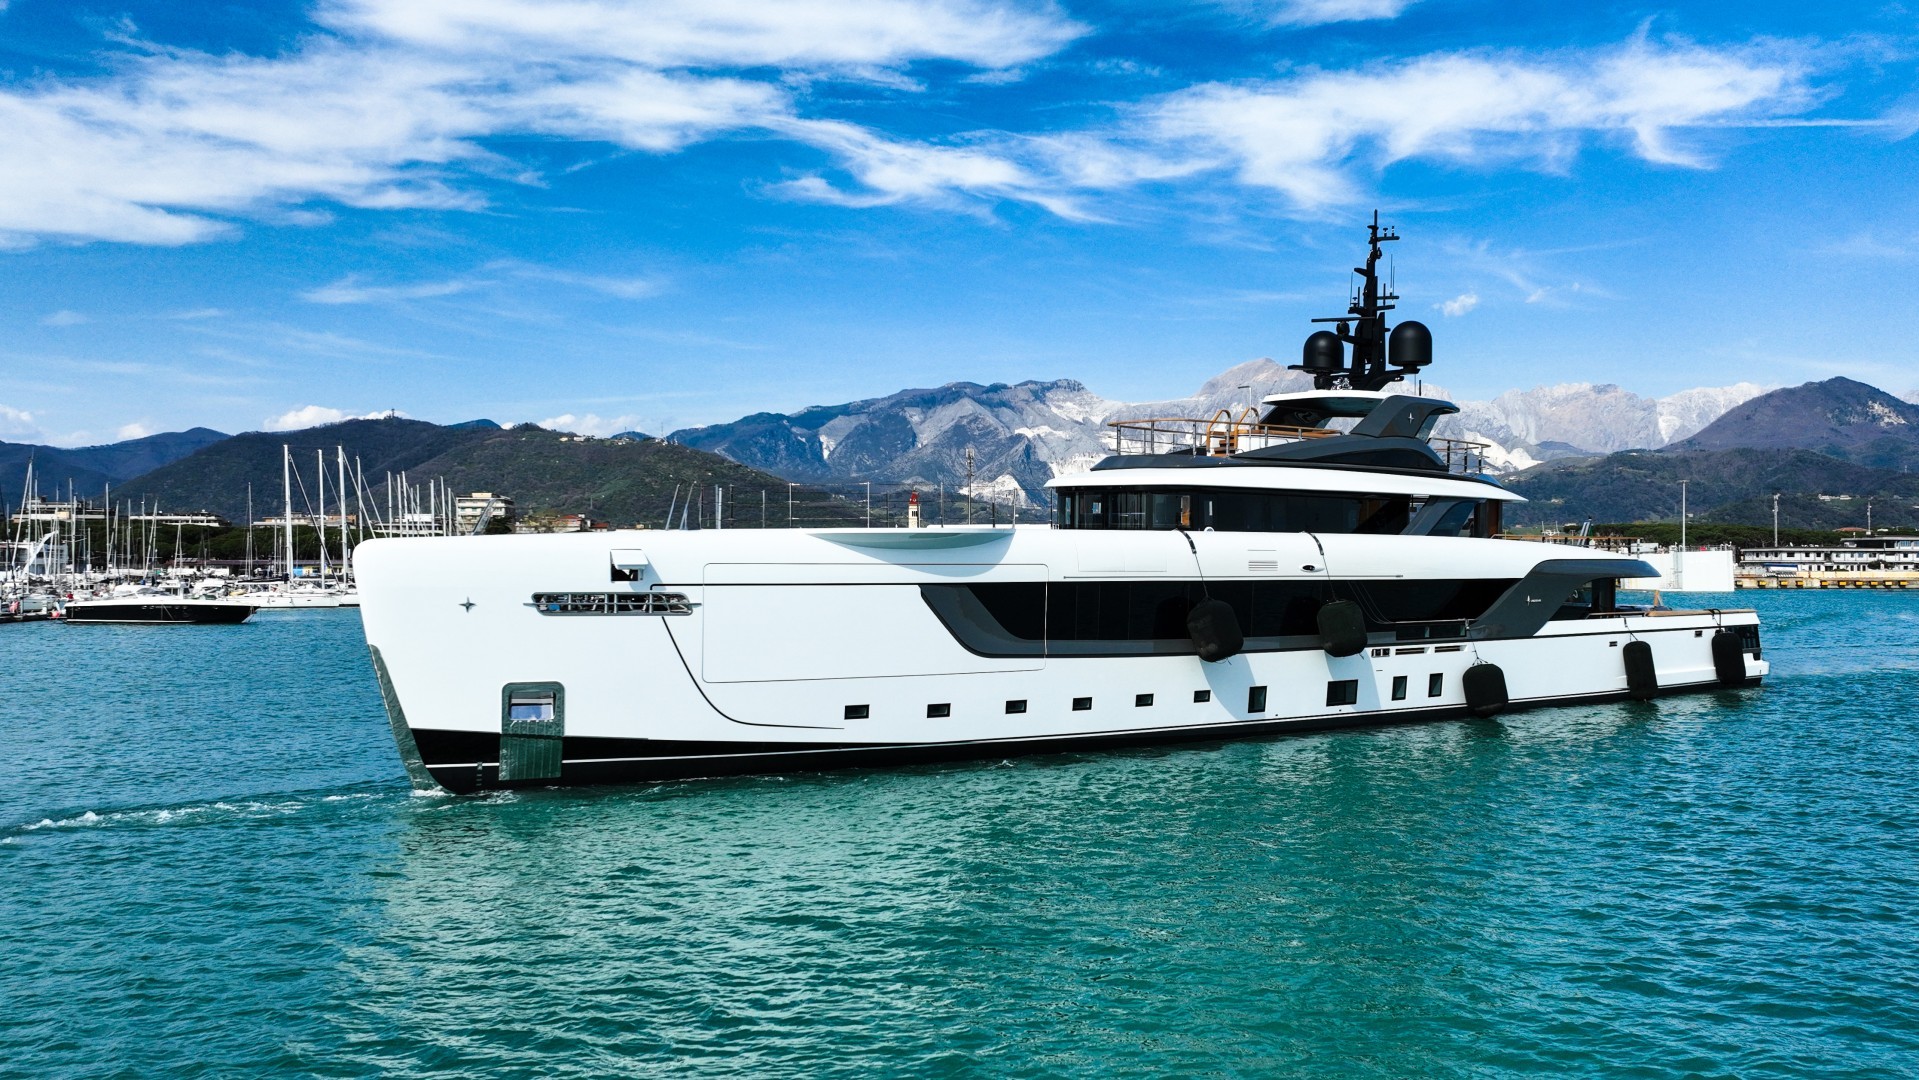 TISG launched the new 55m Admiral with interiors by Giorgio Armani